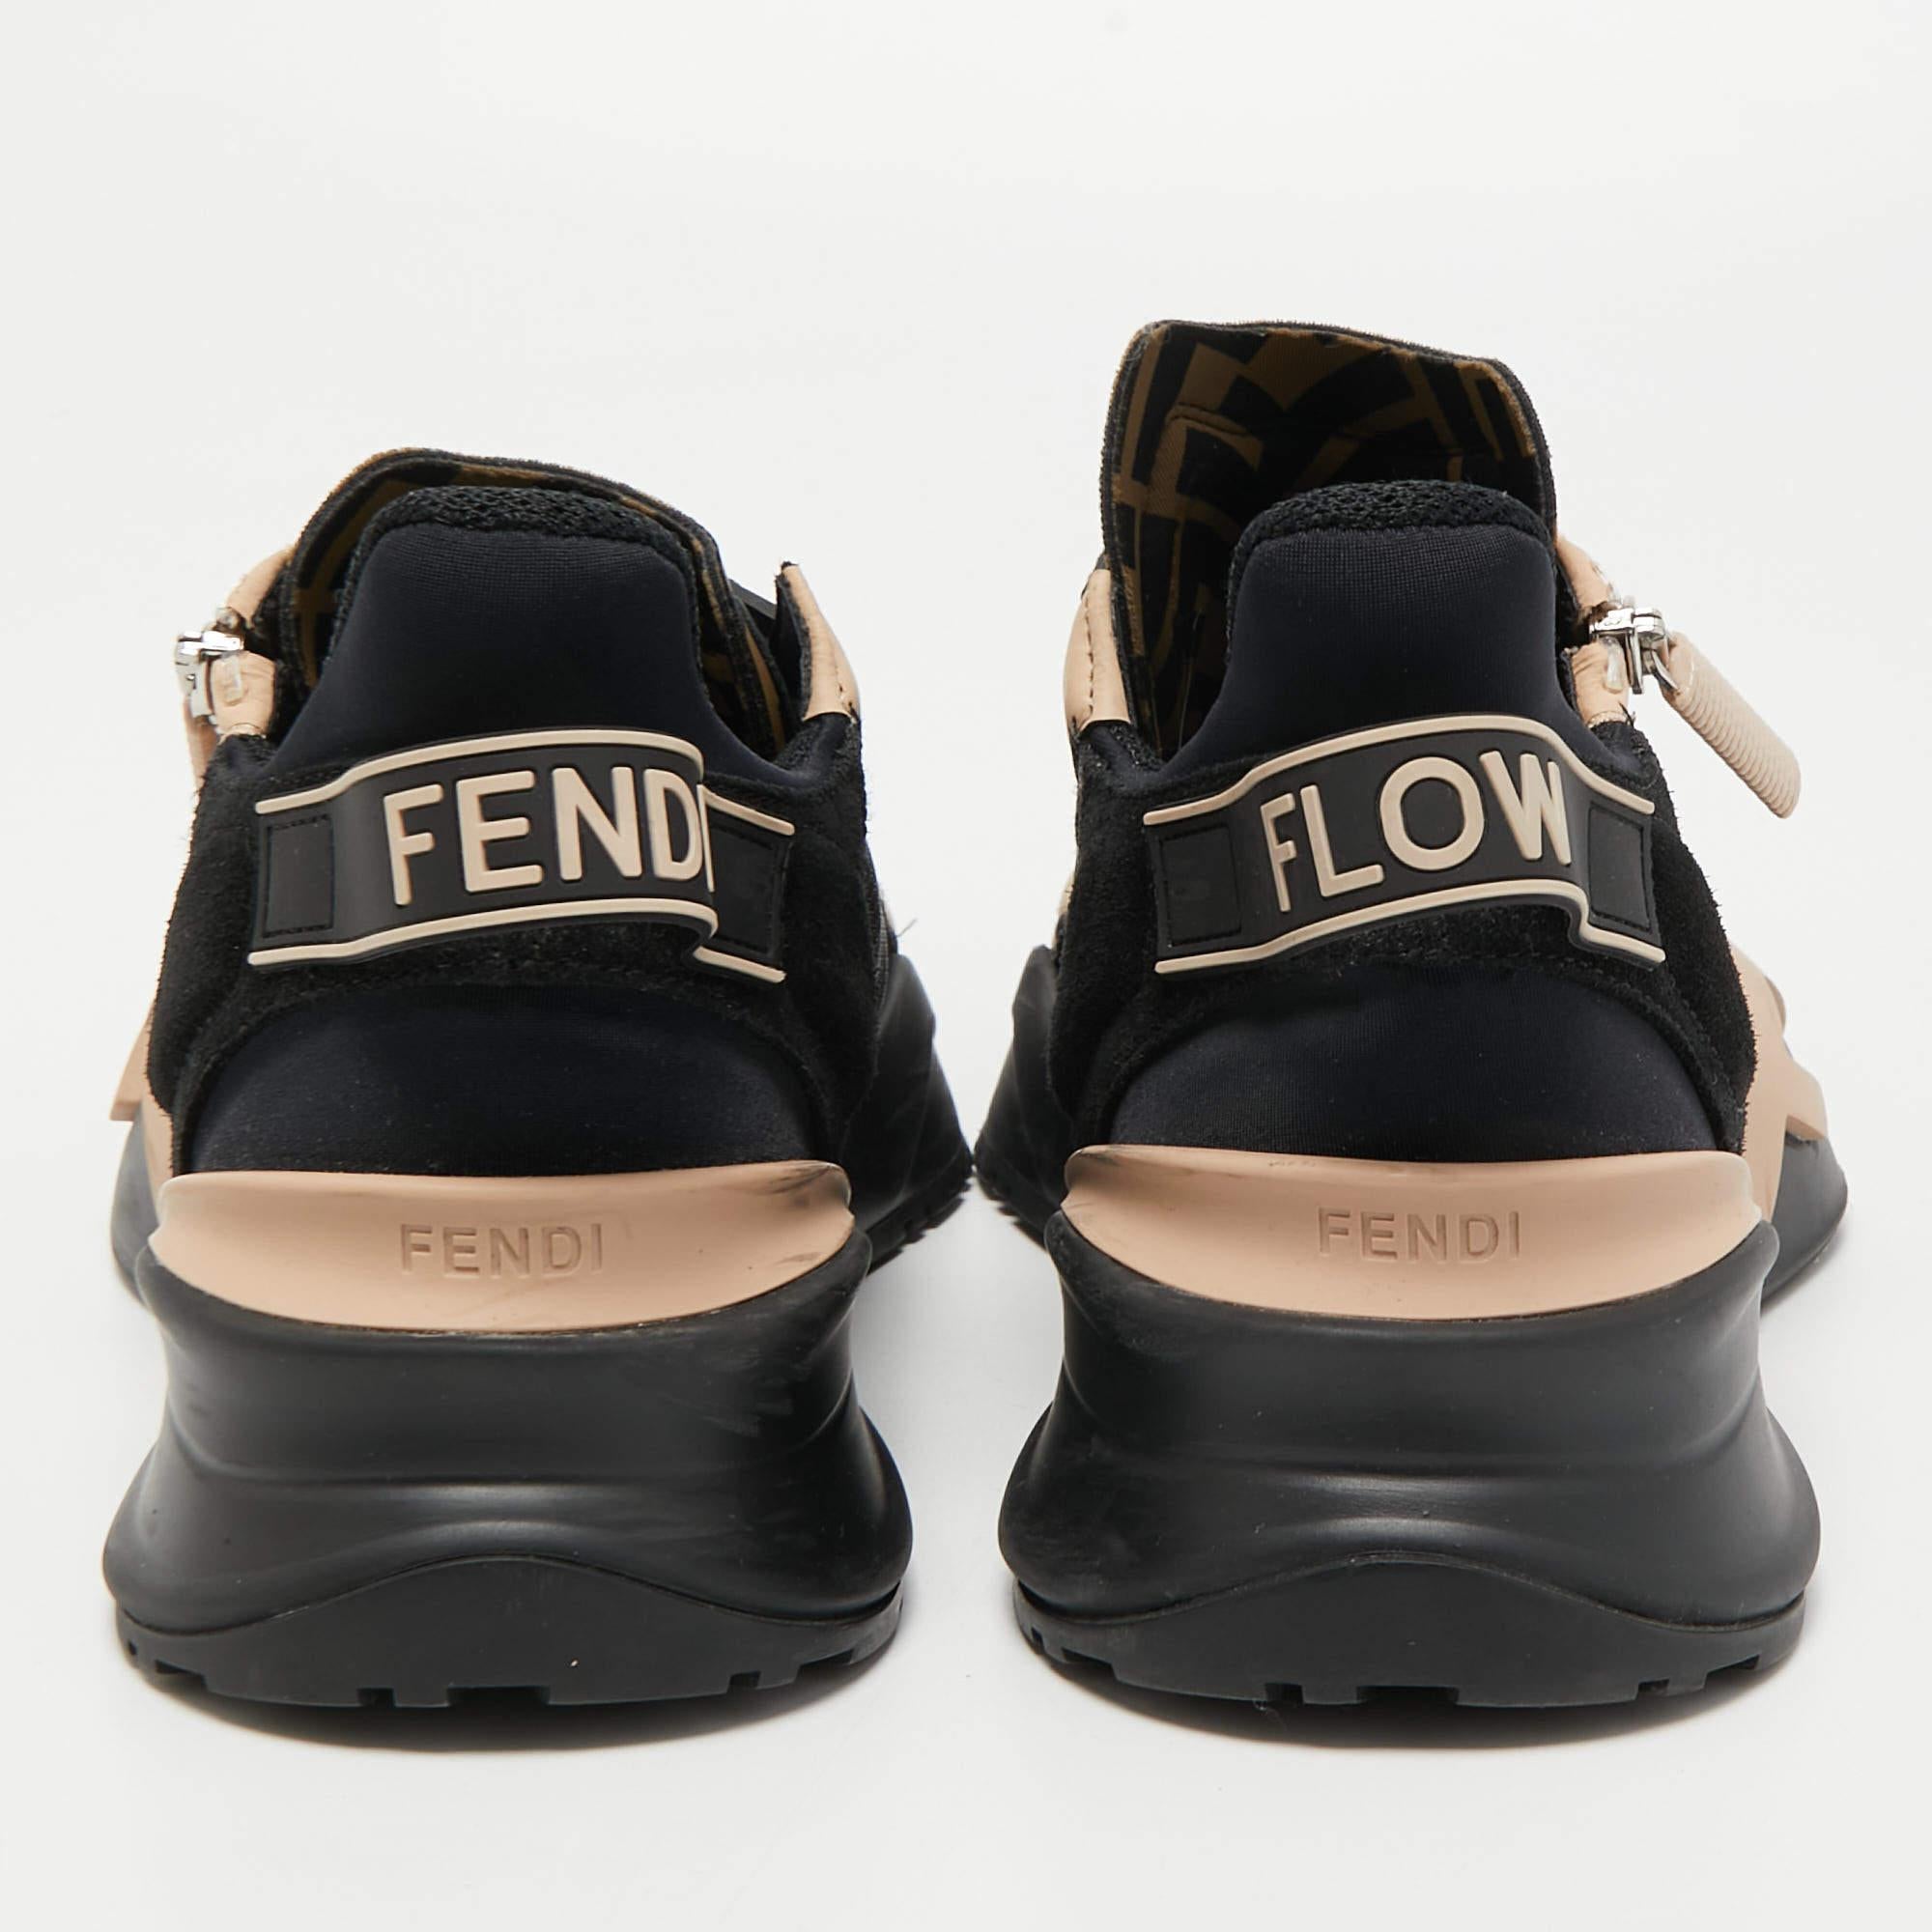 Fendi Black/Peach Suede and Nylon Flow Low Top Sneakers Size 39 1